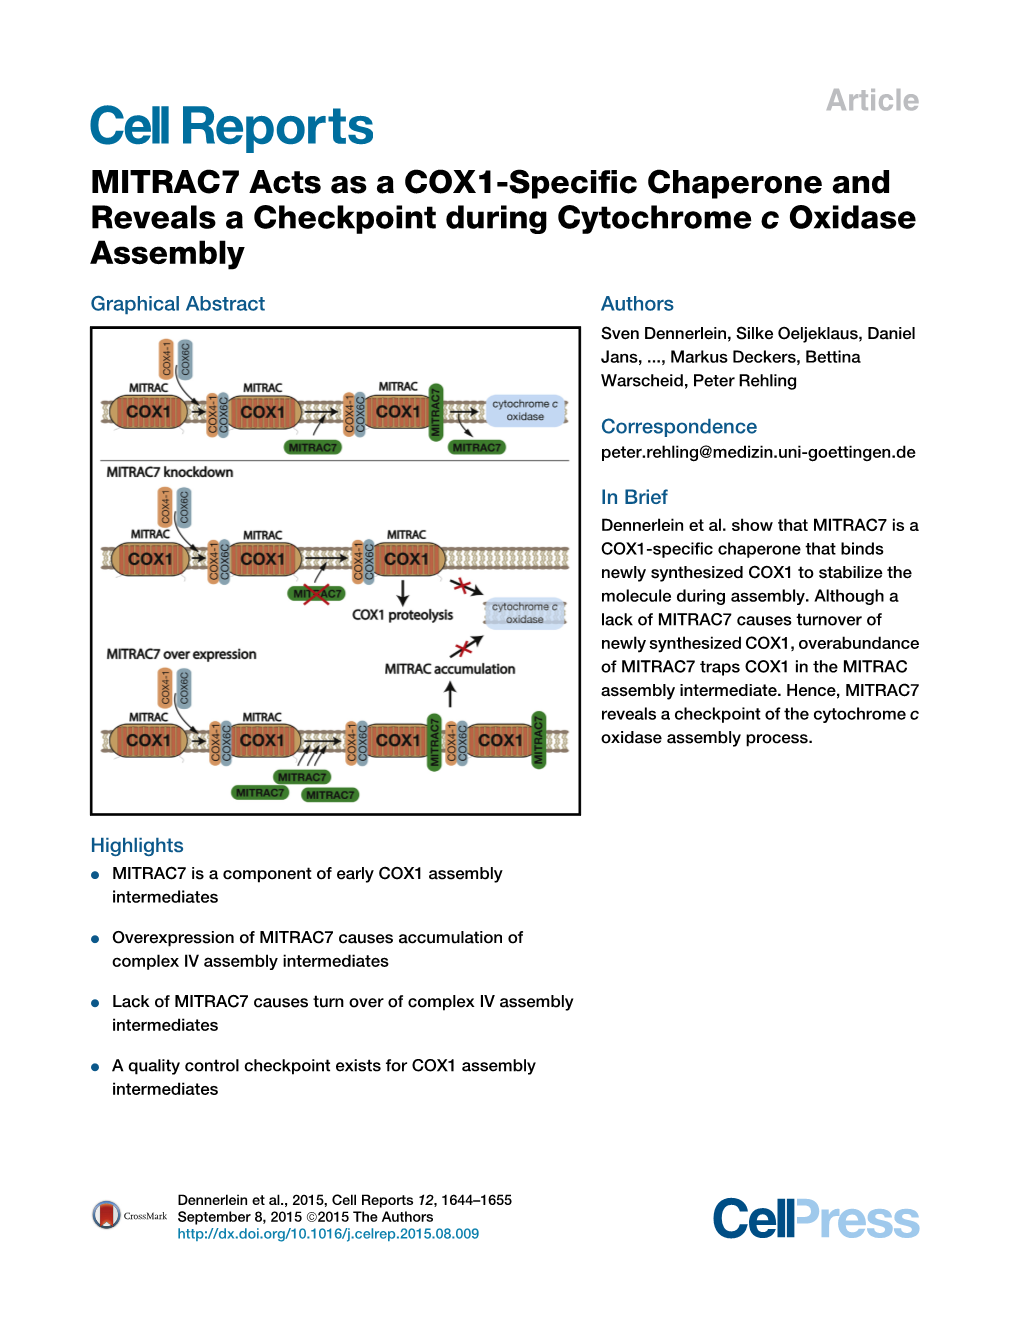 MITRAC7 Acts As a COX1-Specific Chaperone And